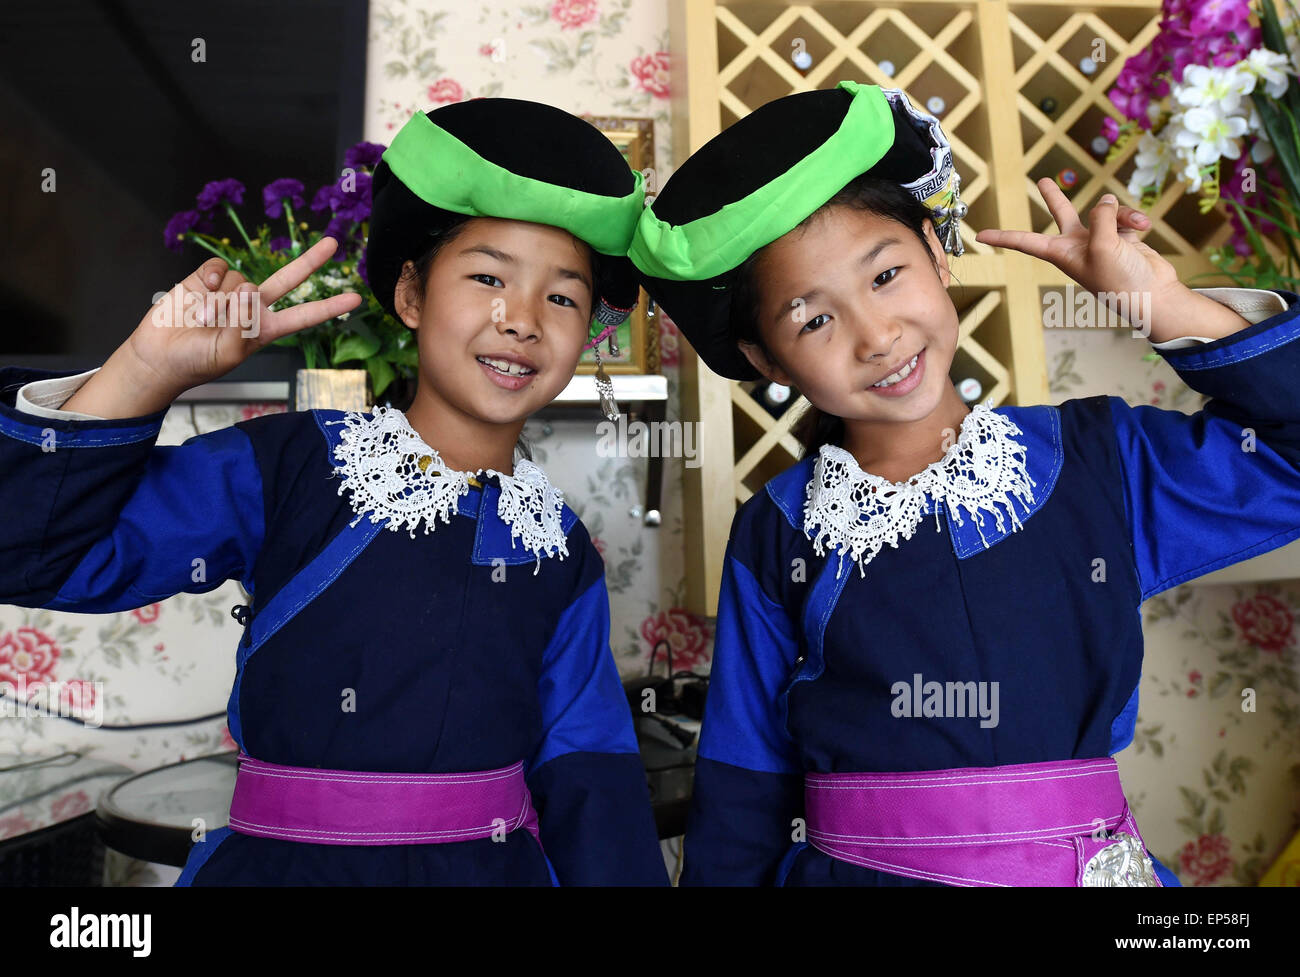 (150514) -- MOJIANG, May 14, 2015 (Xinhua) -- Twin sisters Jin Meixian (R) and Jin Huixian wearing folk costumes pose for a group photo at home in Mojiang Hani Autonomous County, southwest China's Yunnan Province, May 12, 2015.    Twin sisters Jin Meixian and Jin Huixian, 7, live with their mother Wang Fei, who opens a cold drink store. Their father does business in another province.    Meixian, the older, loves music and wants to be a musical teacher. Huixian likes dancing, and wants to go to college in Beijing. 'We always feel connected. Sometimes we find out that we are singing the same son Stock Photo